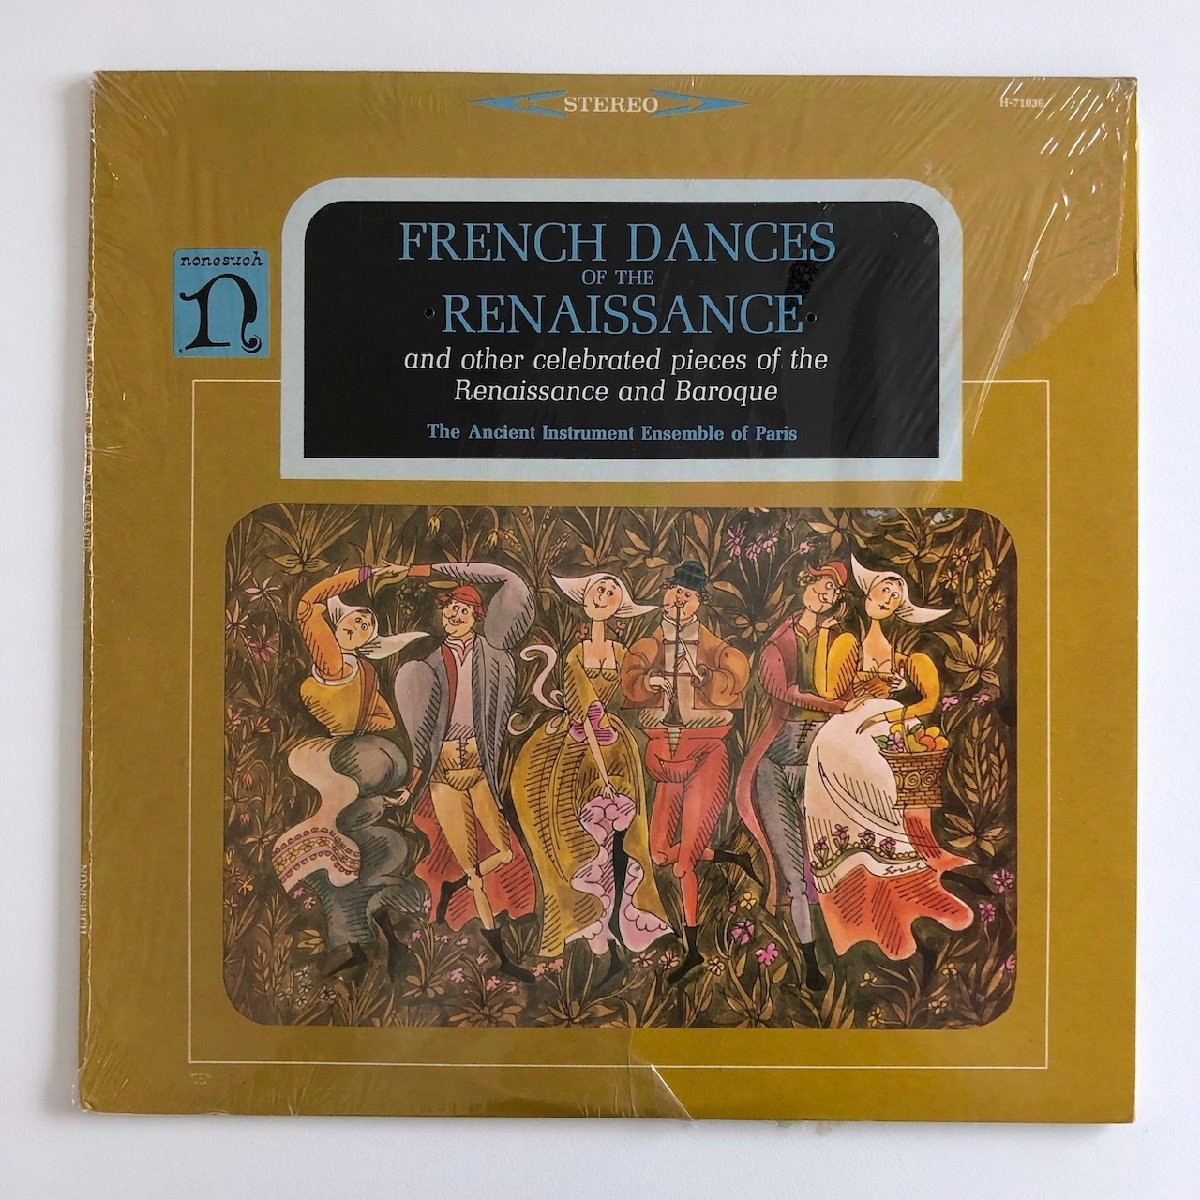 LP/ パリ古楽楽器アンサンブル / FRENCH DANCE OF THE RENAISSANCE / US盤 NONESUCH H-71036 31215_画像1